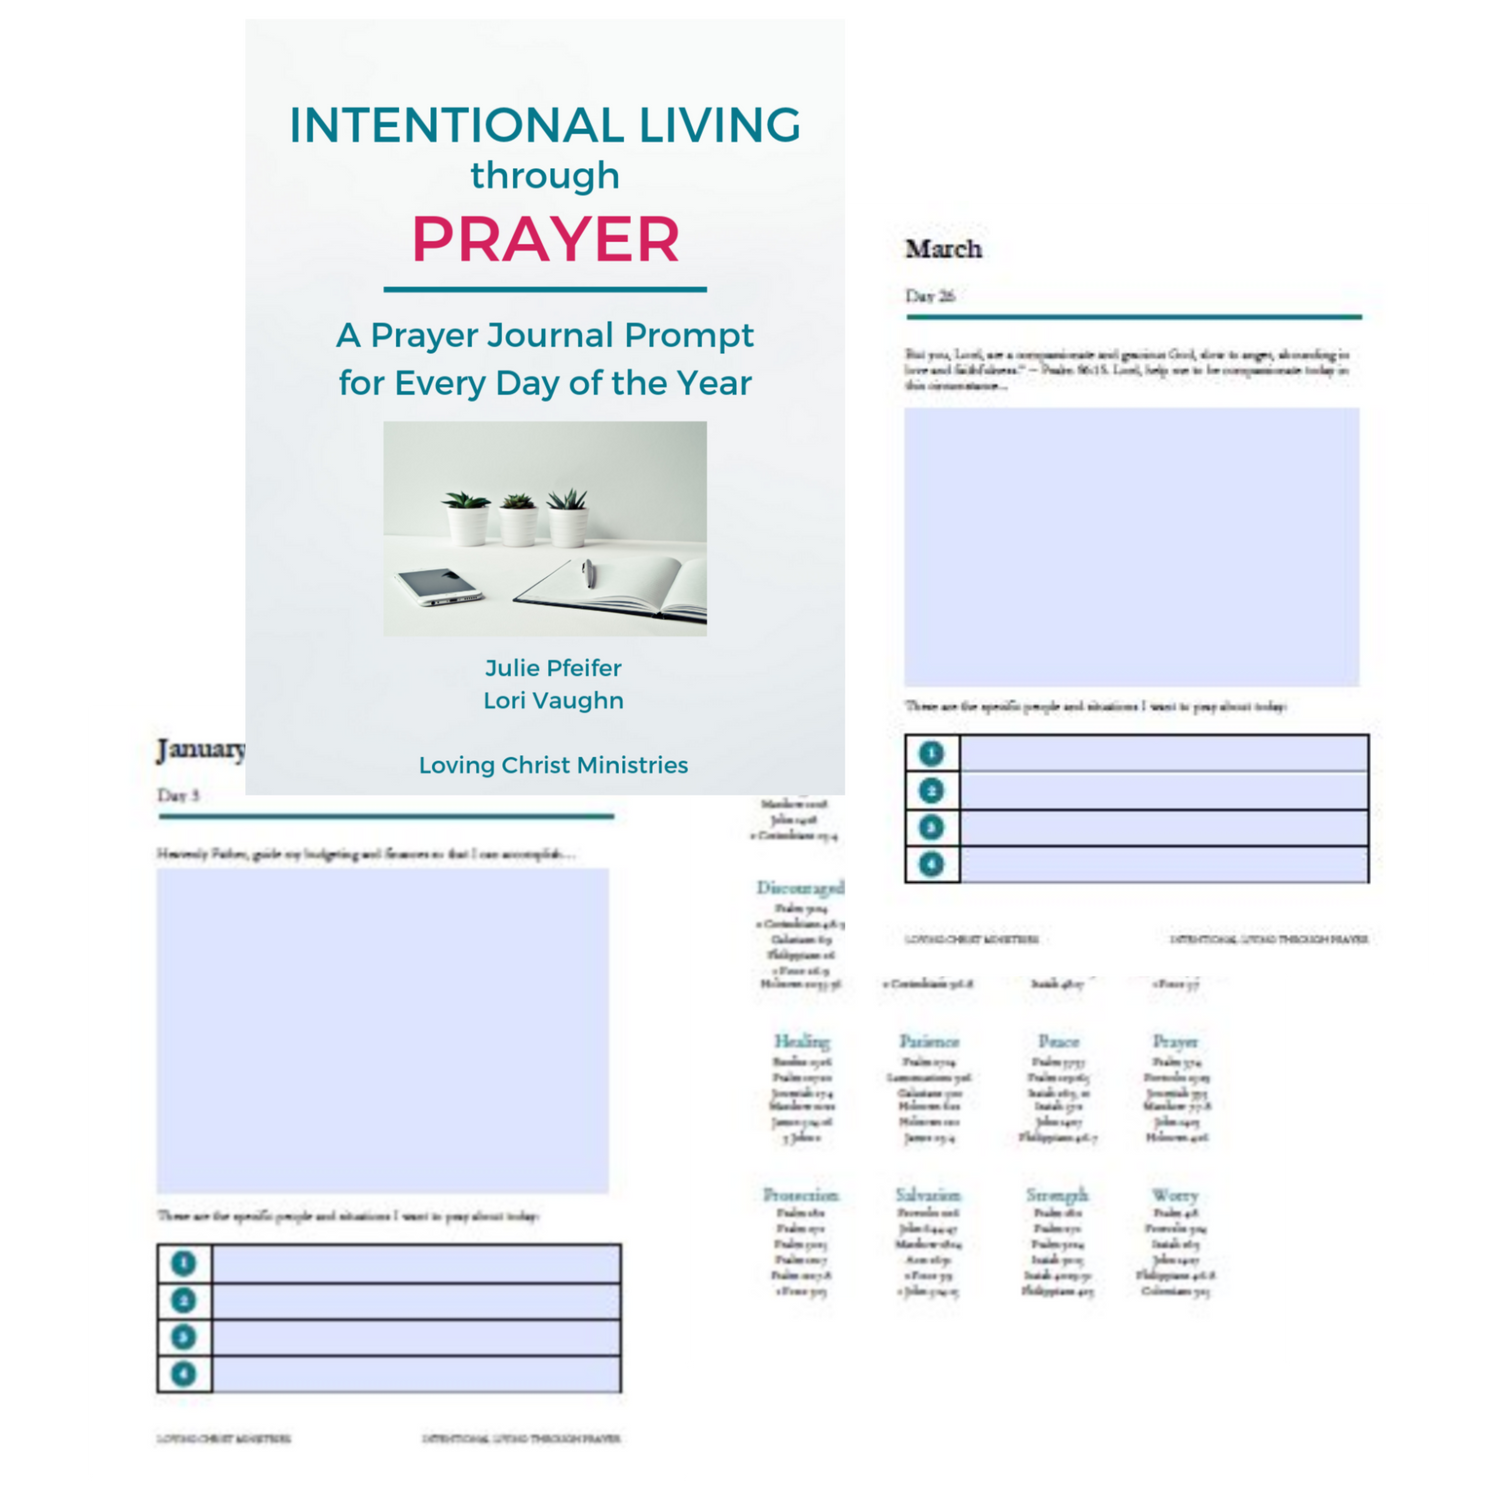 Intentional Living through Prayer: A Prayer Prompt for Every Day of the Year